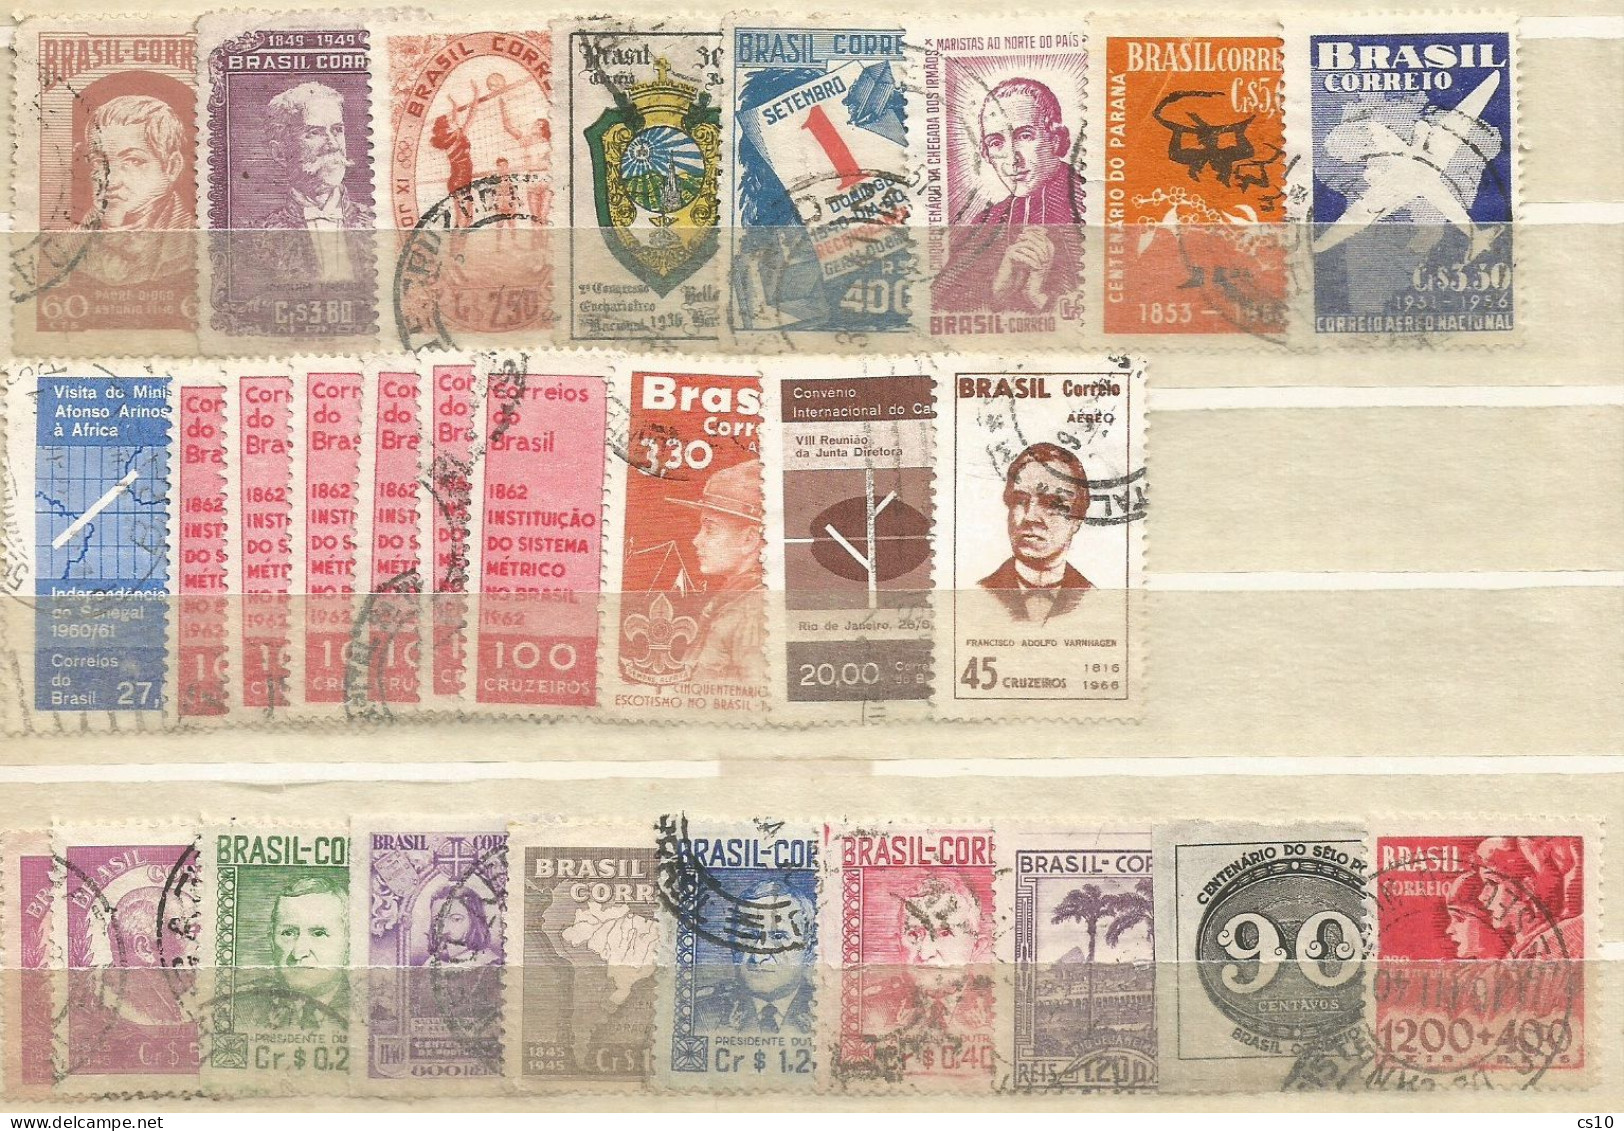 Brasil Brazil #11 scans Used stamps Study lot with older and Blocks Fiscals Imperforated Pairs Strips up to 1970 circa